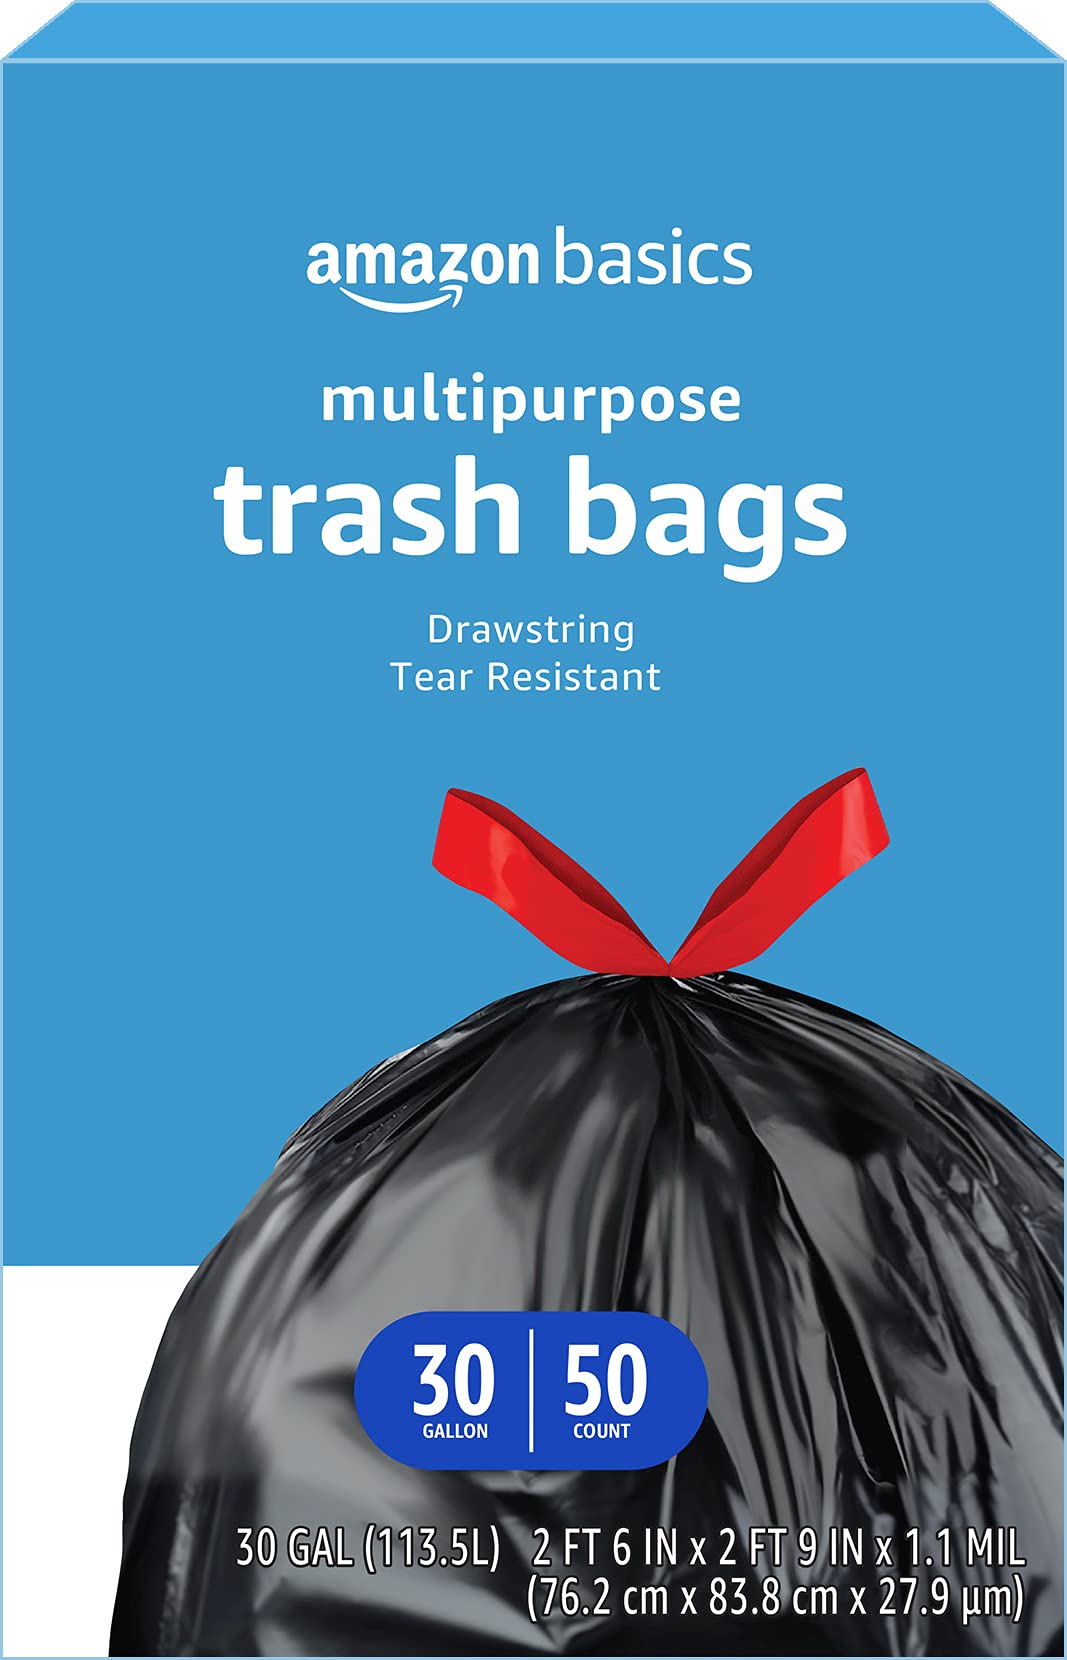 50-Count 30-Gallon Amazon Basics Multipurpose Drawstring Trash Bags (Unscented) $7.78 w/ S&S + Free Shipping w/ Prime or on $35+